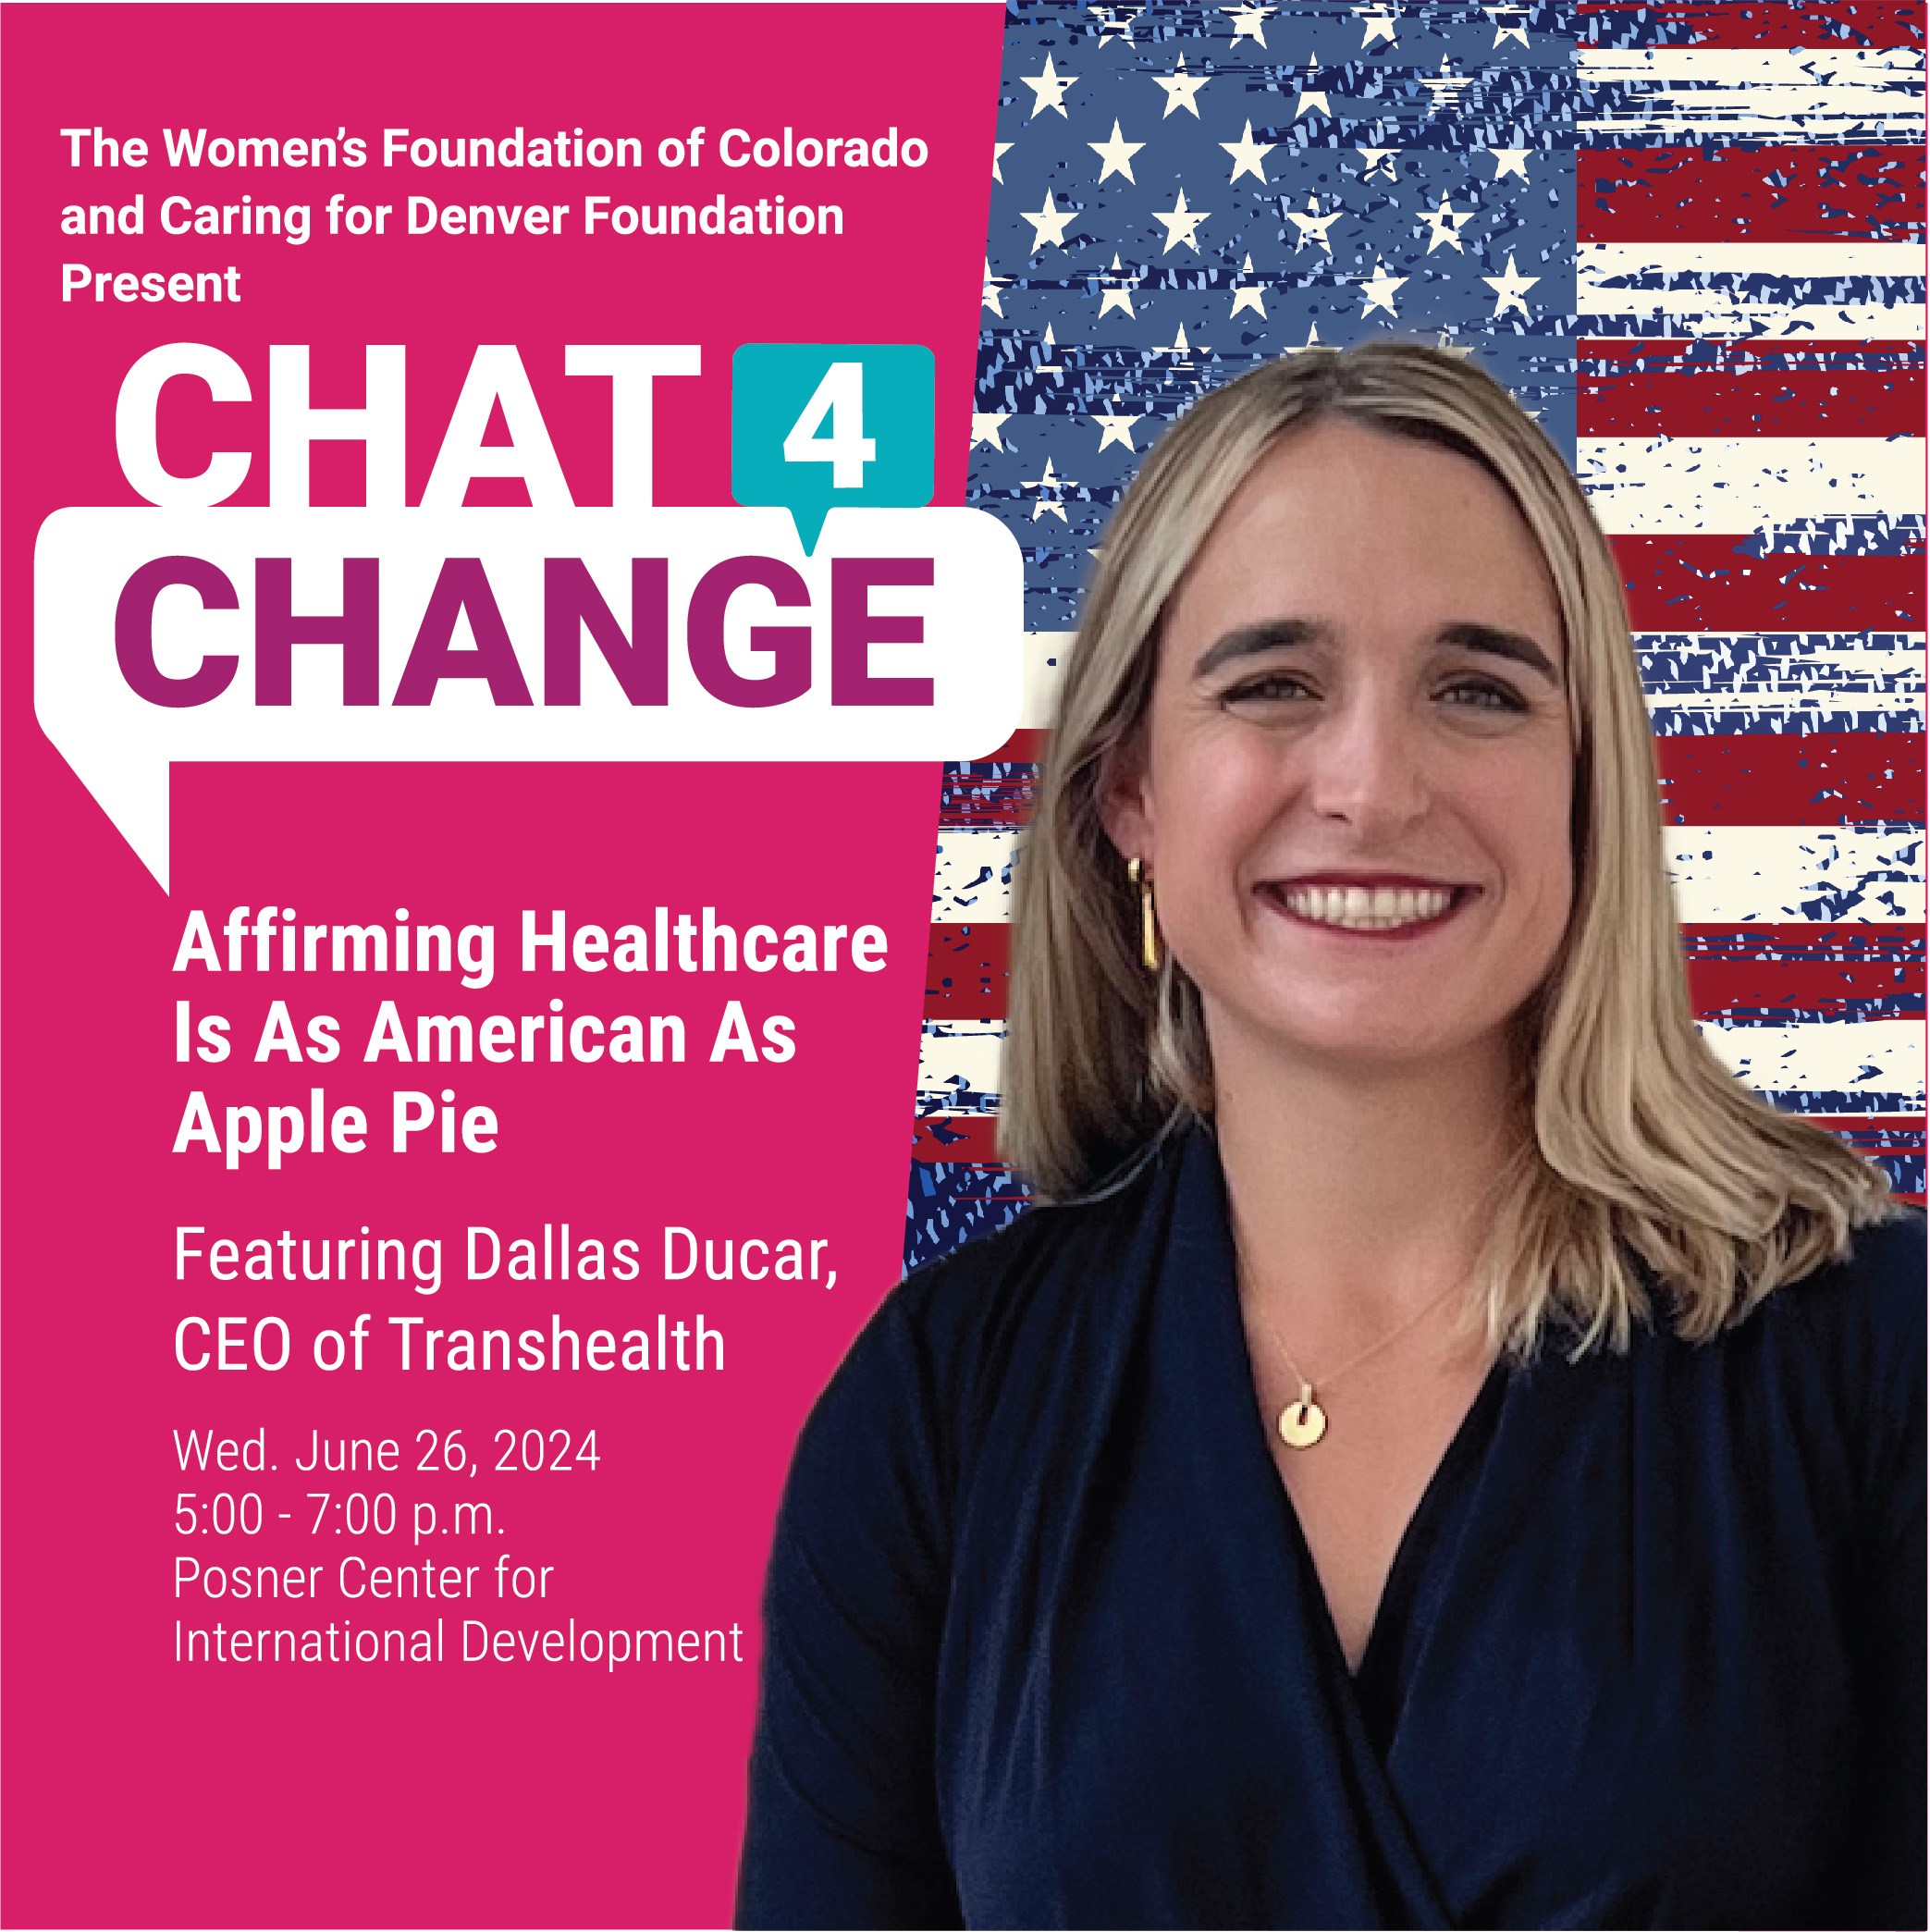 Chat4Change: Affirming Healthcare Is As American As Apple Pie with Dallas Ducar. An image of a woman standing in front of stars and stripes. 